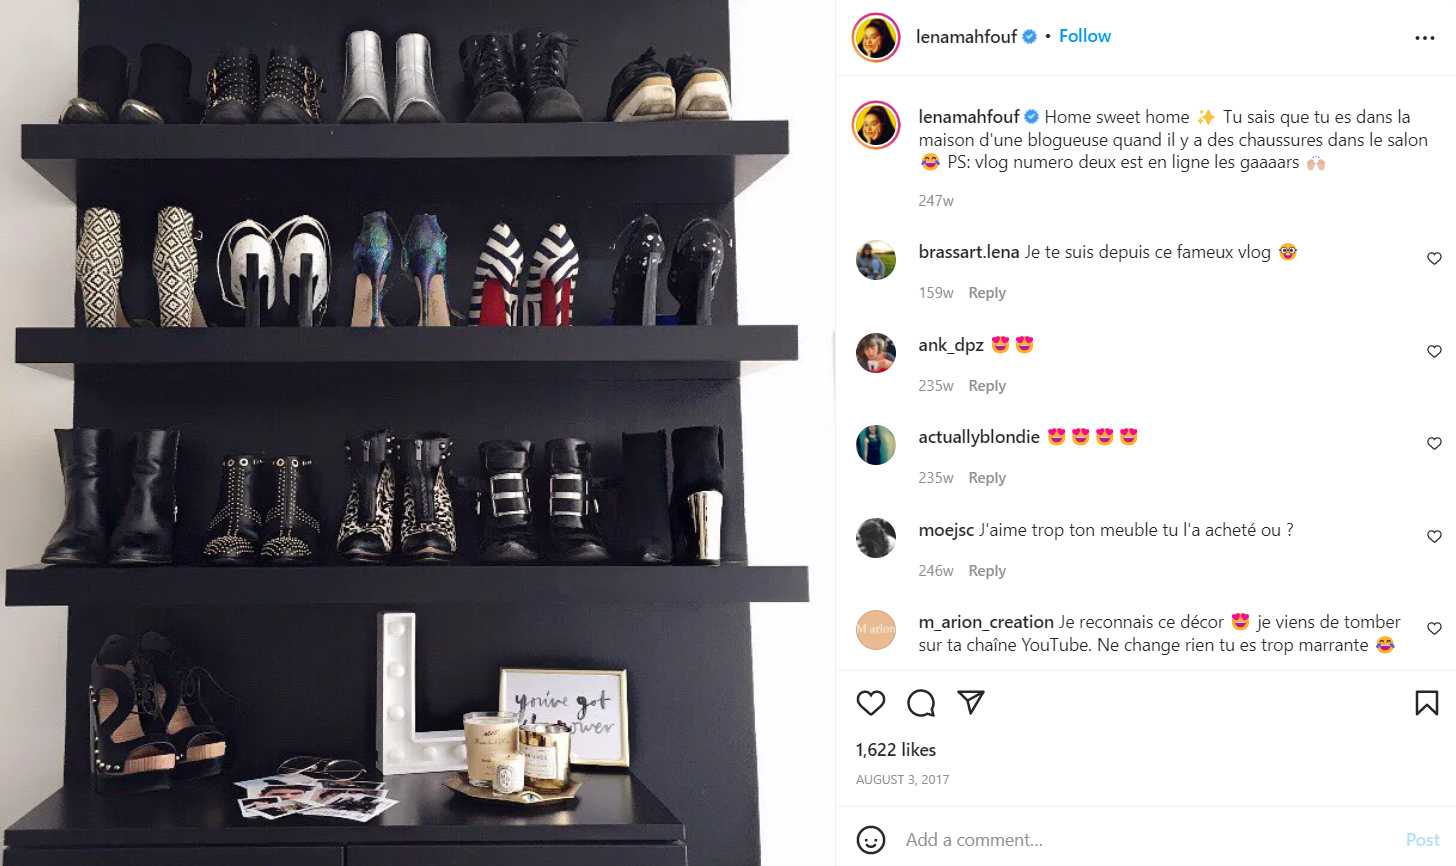 Lena Situations often talks about her shoe collection on social media